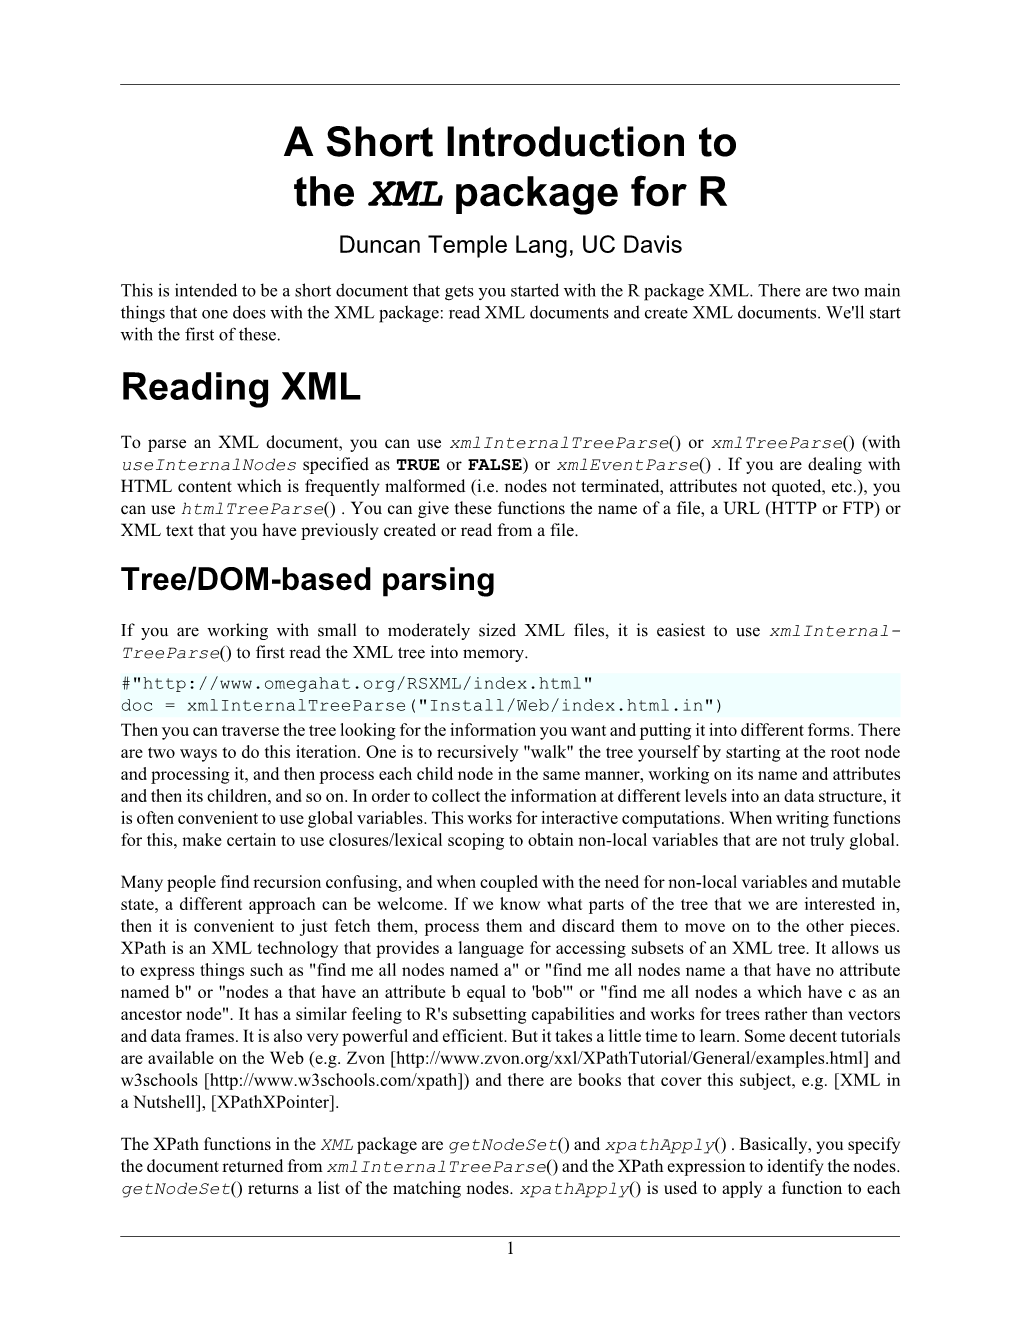 A Short Introduction to the XML Package for R Duncan Temple Lang, UC Davis